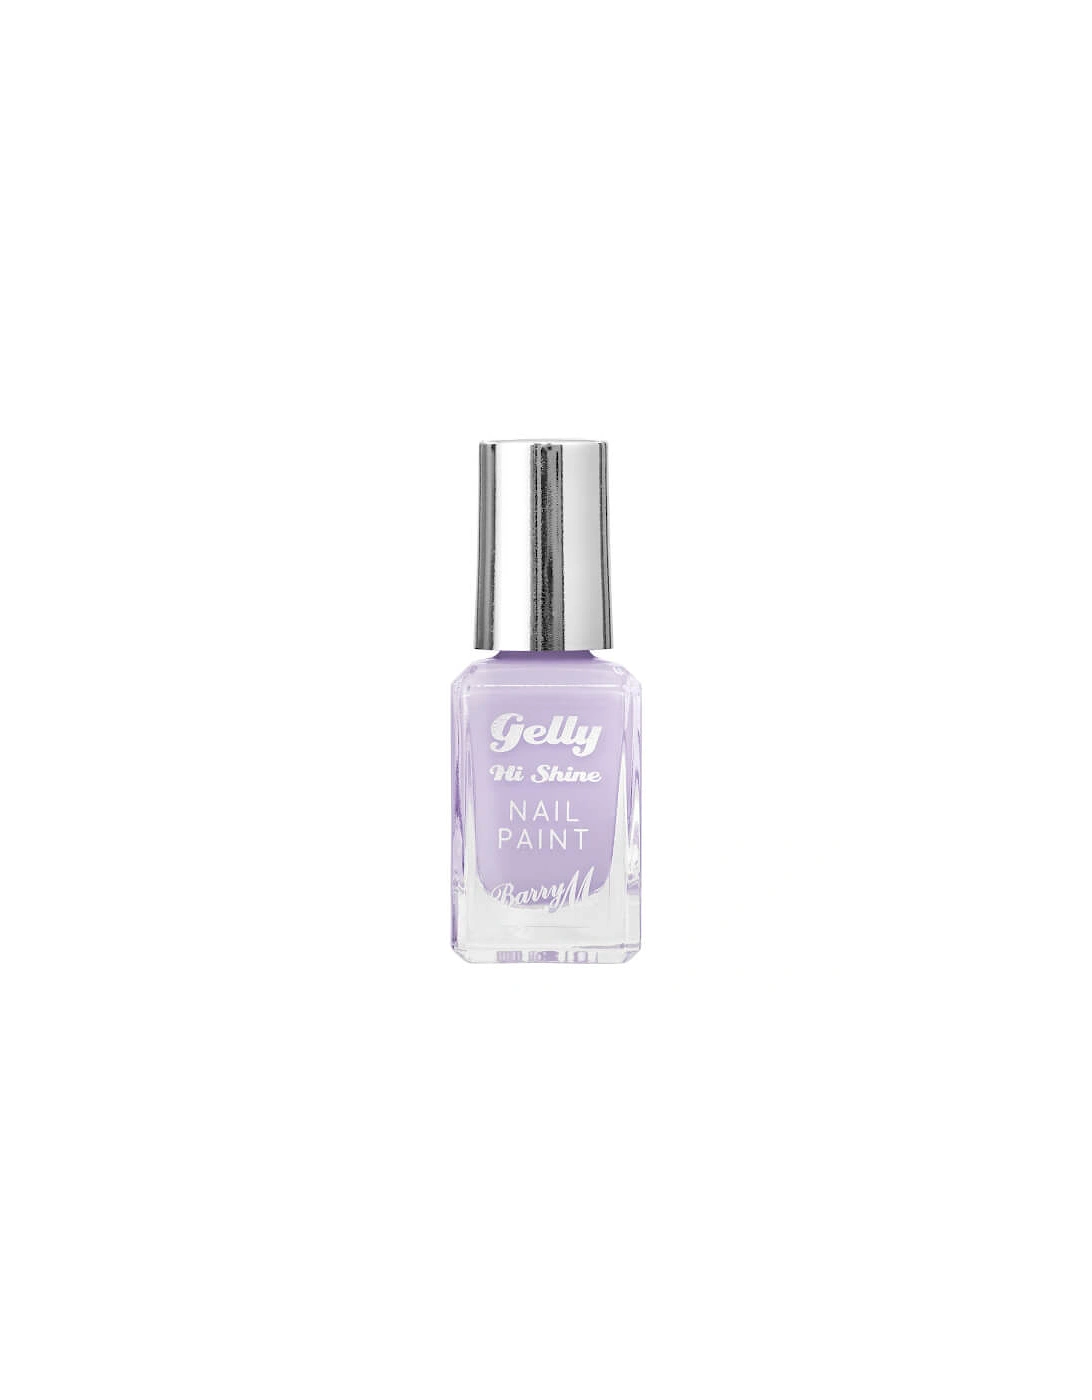 Gelly Hi Shine Nail Paint - Lavender, 2 of 1